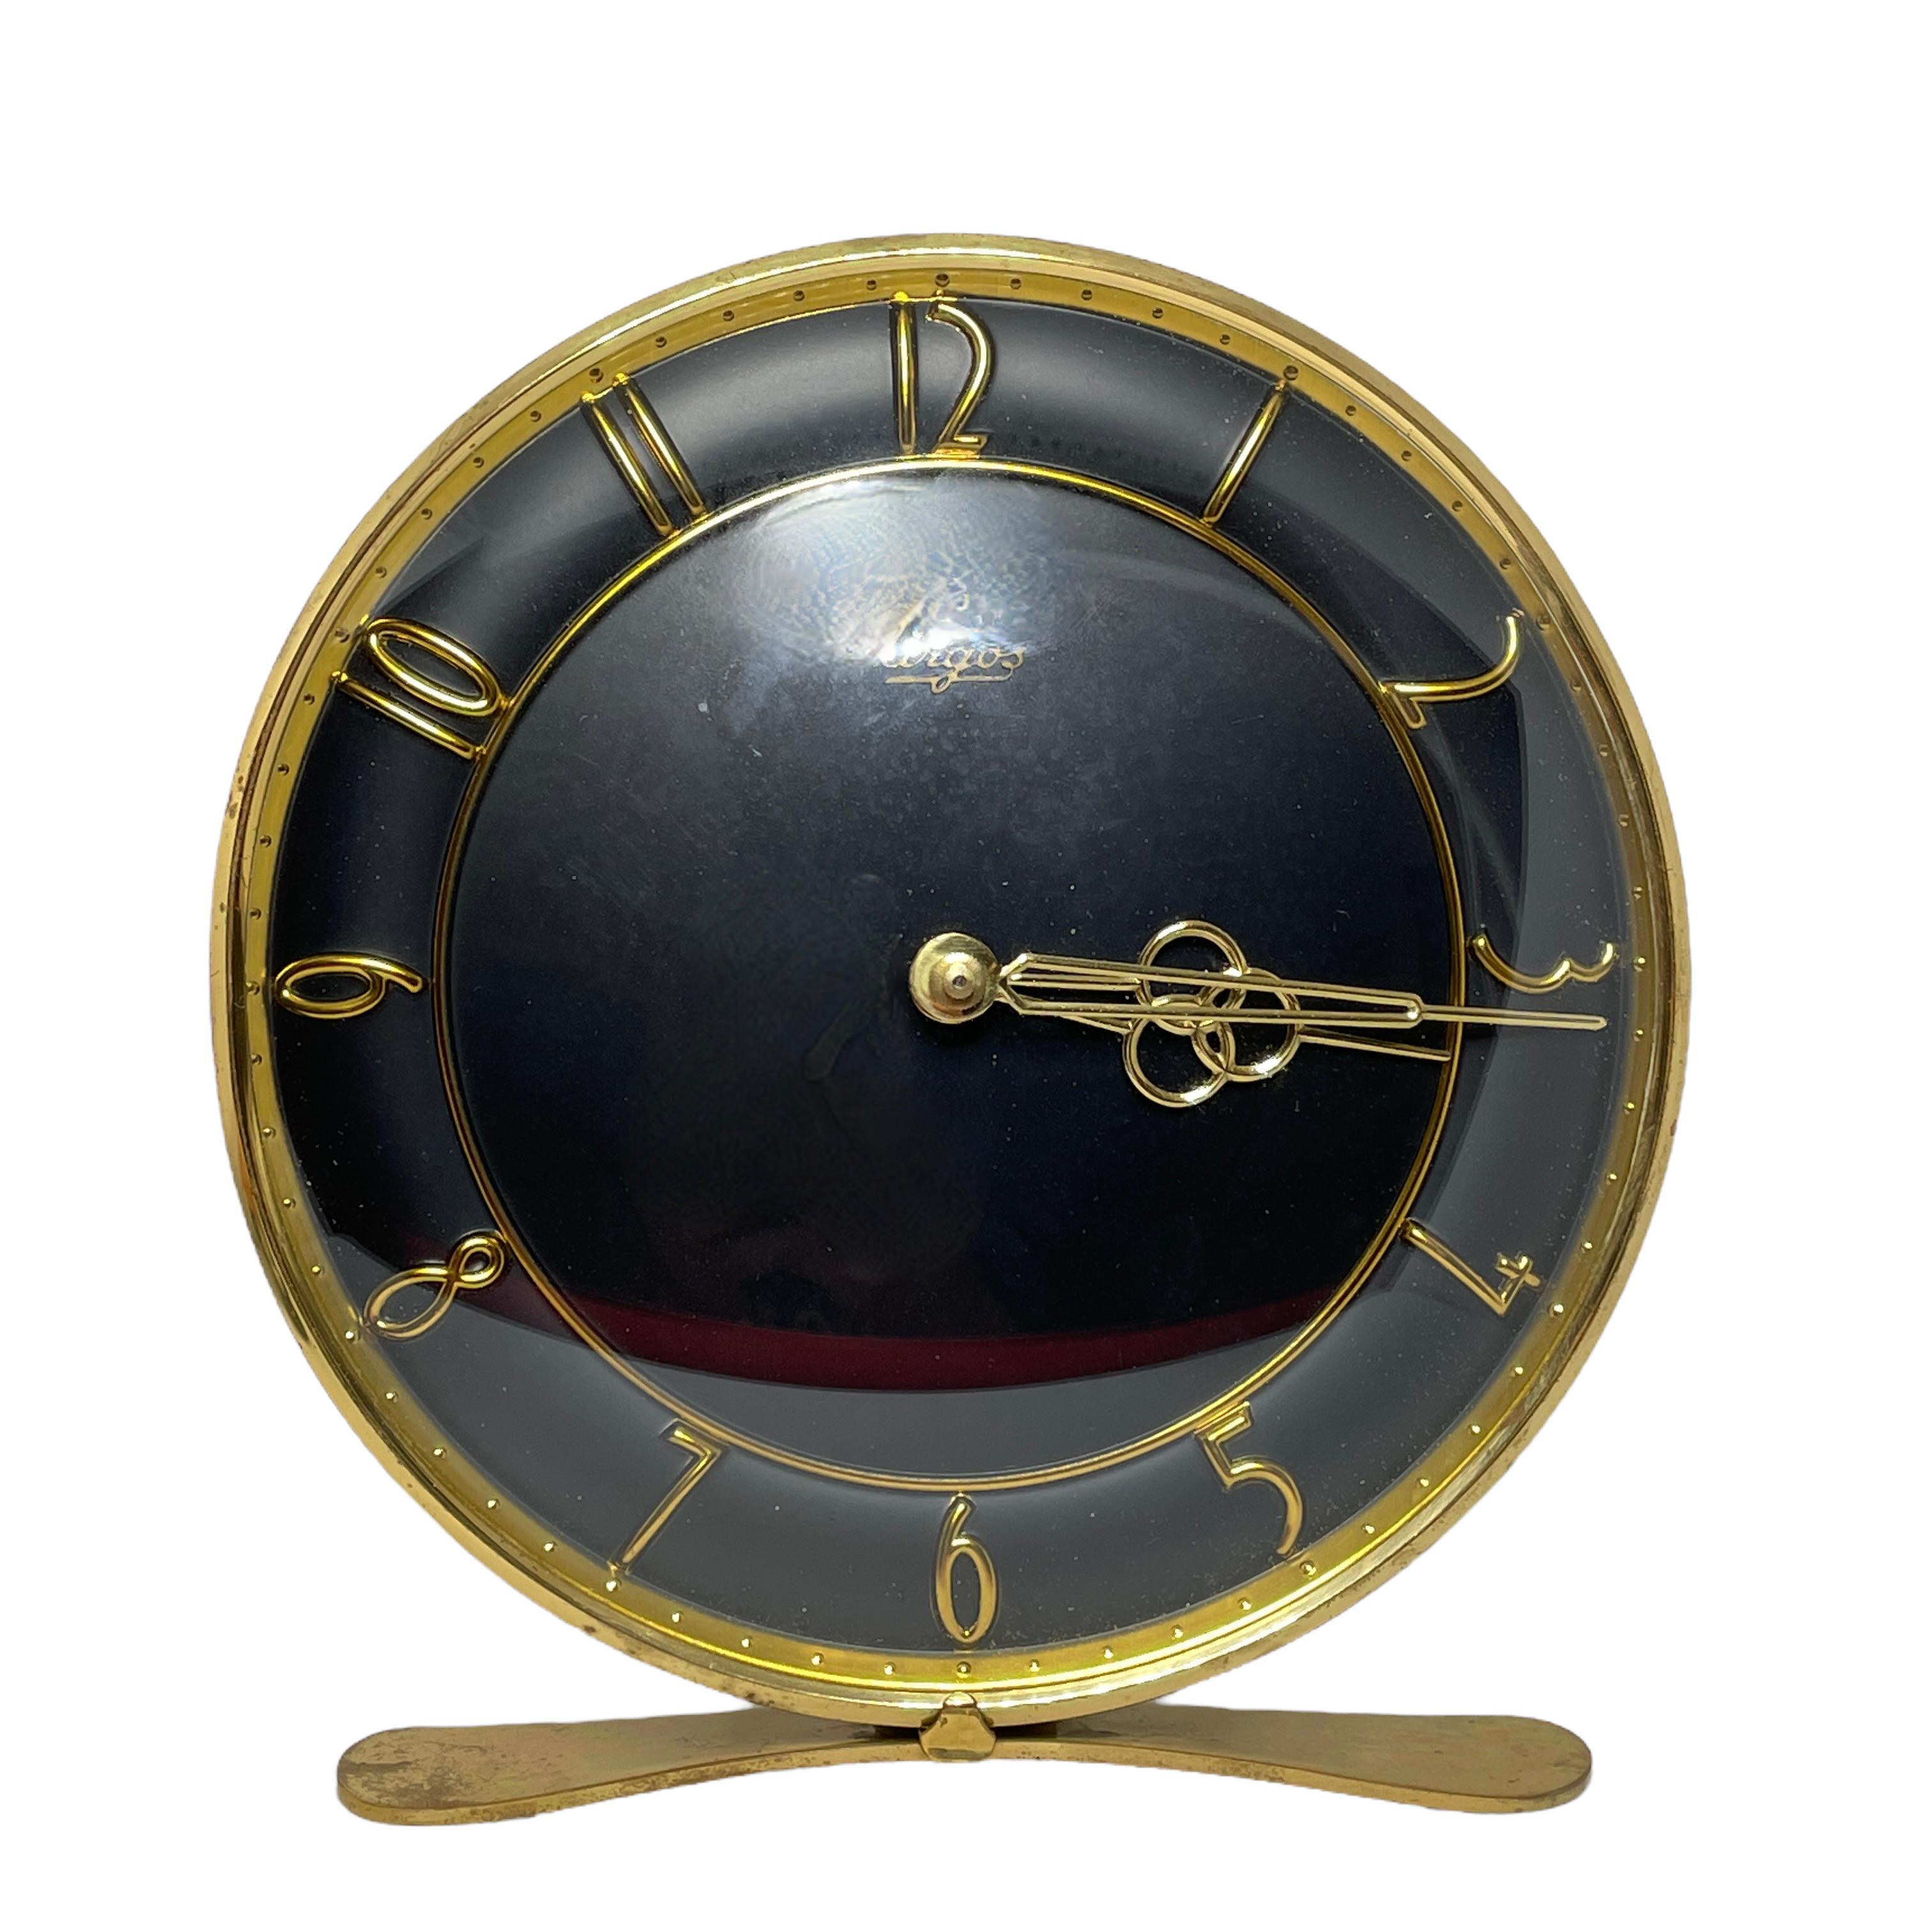 A beautiful Mid-Century Modern brass desk clock with a black clocks face. Executed in the 1950s by Urgos, Germany. Original movement in working condition. The brass with tarnished spots and patina, but this is old-age.